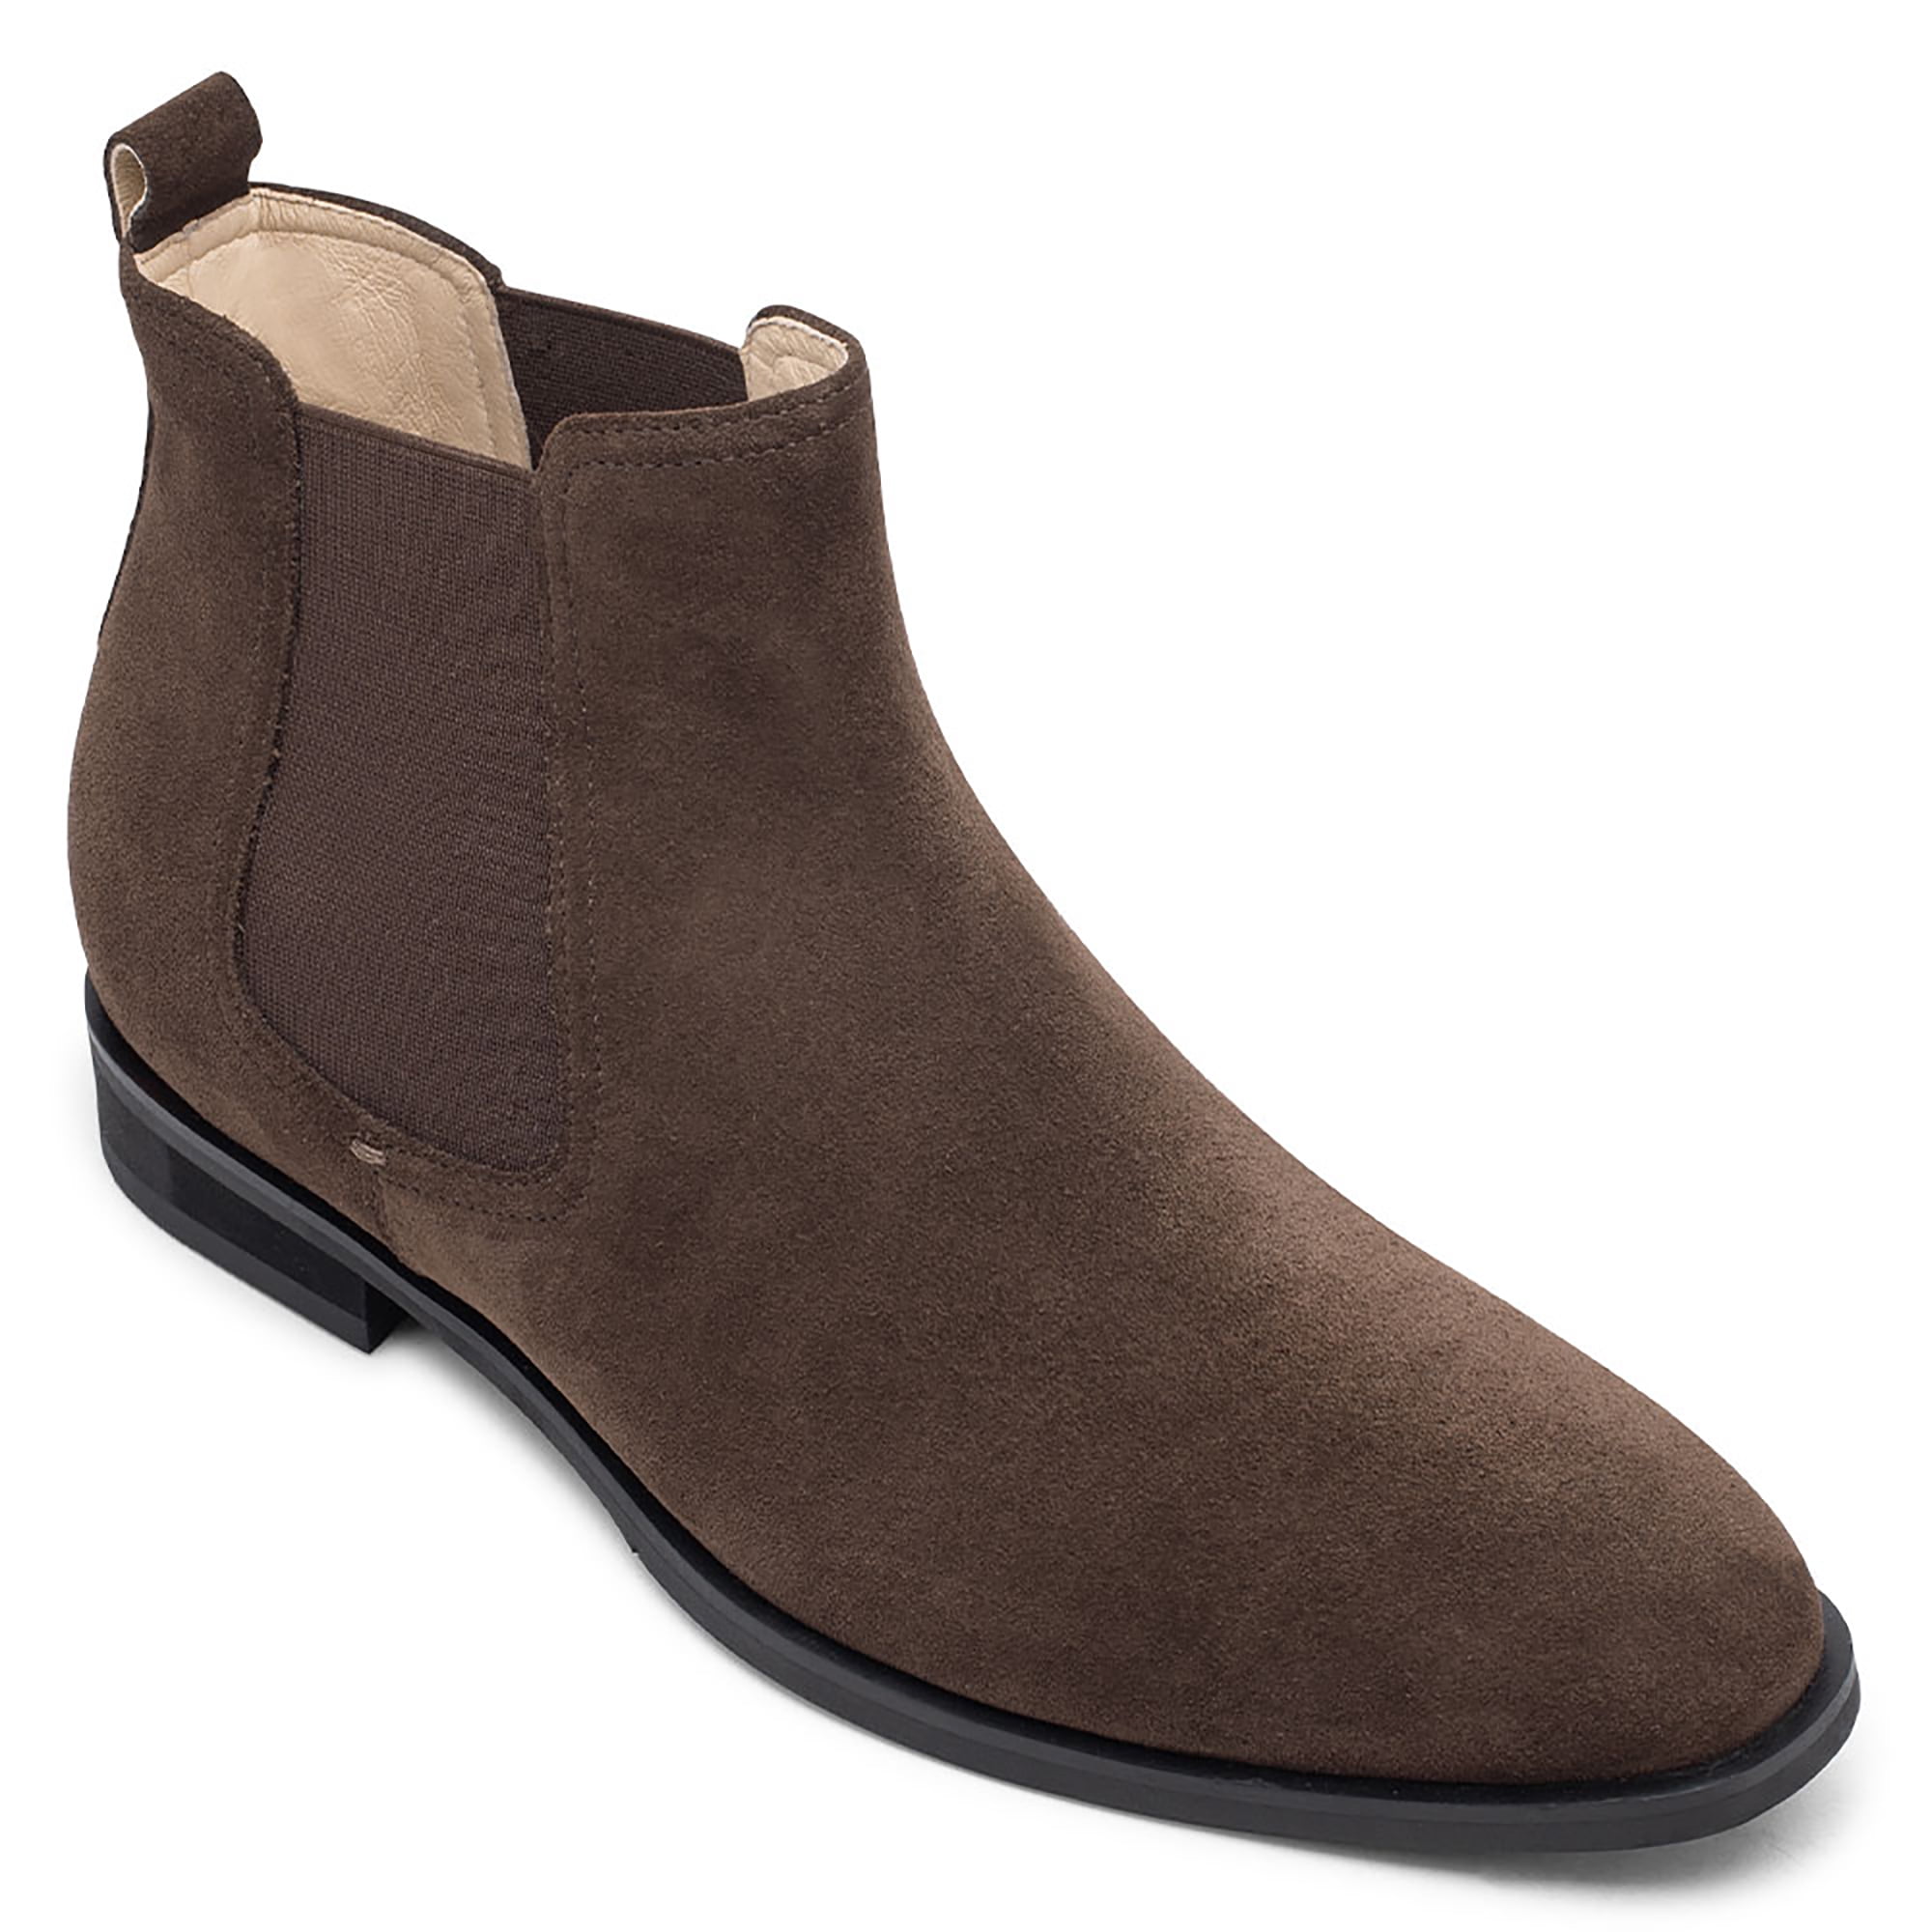 CMR CHAMARIPA Chelsea Boots Mens Coffee Leather Height Increasing Shoes 2.76 - Walmart.com